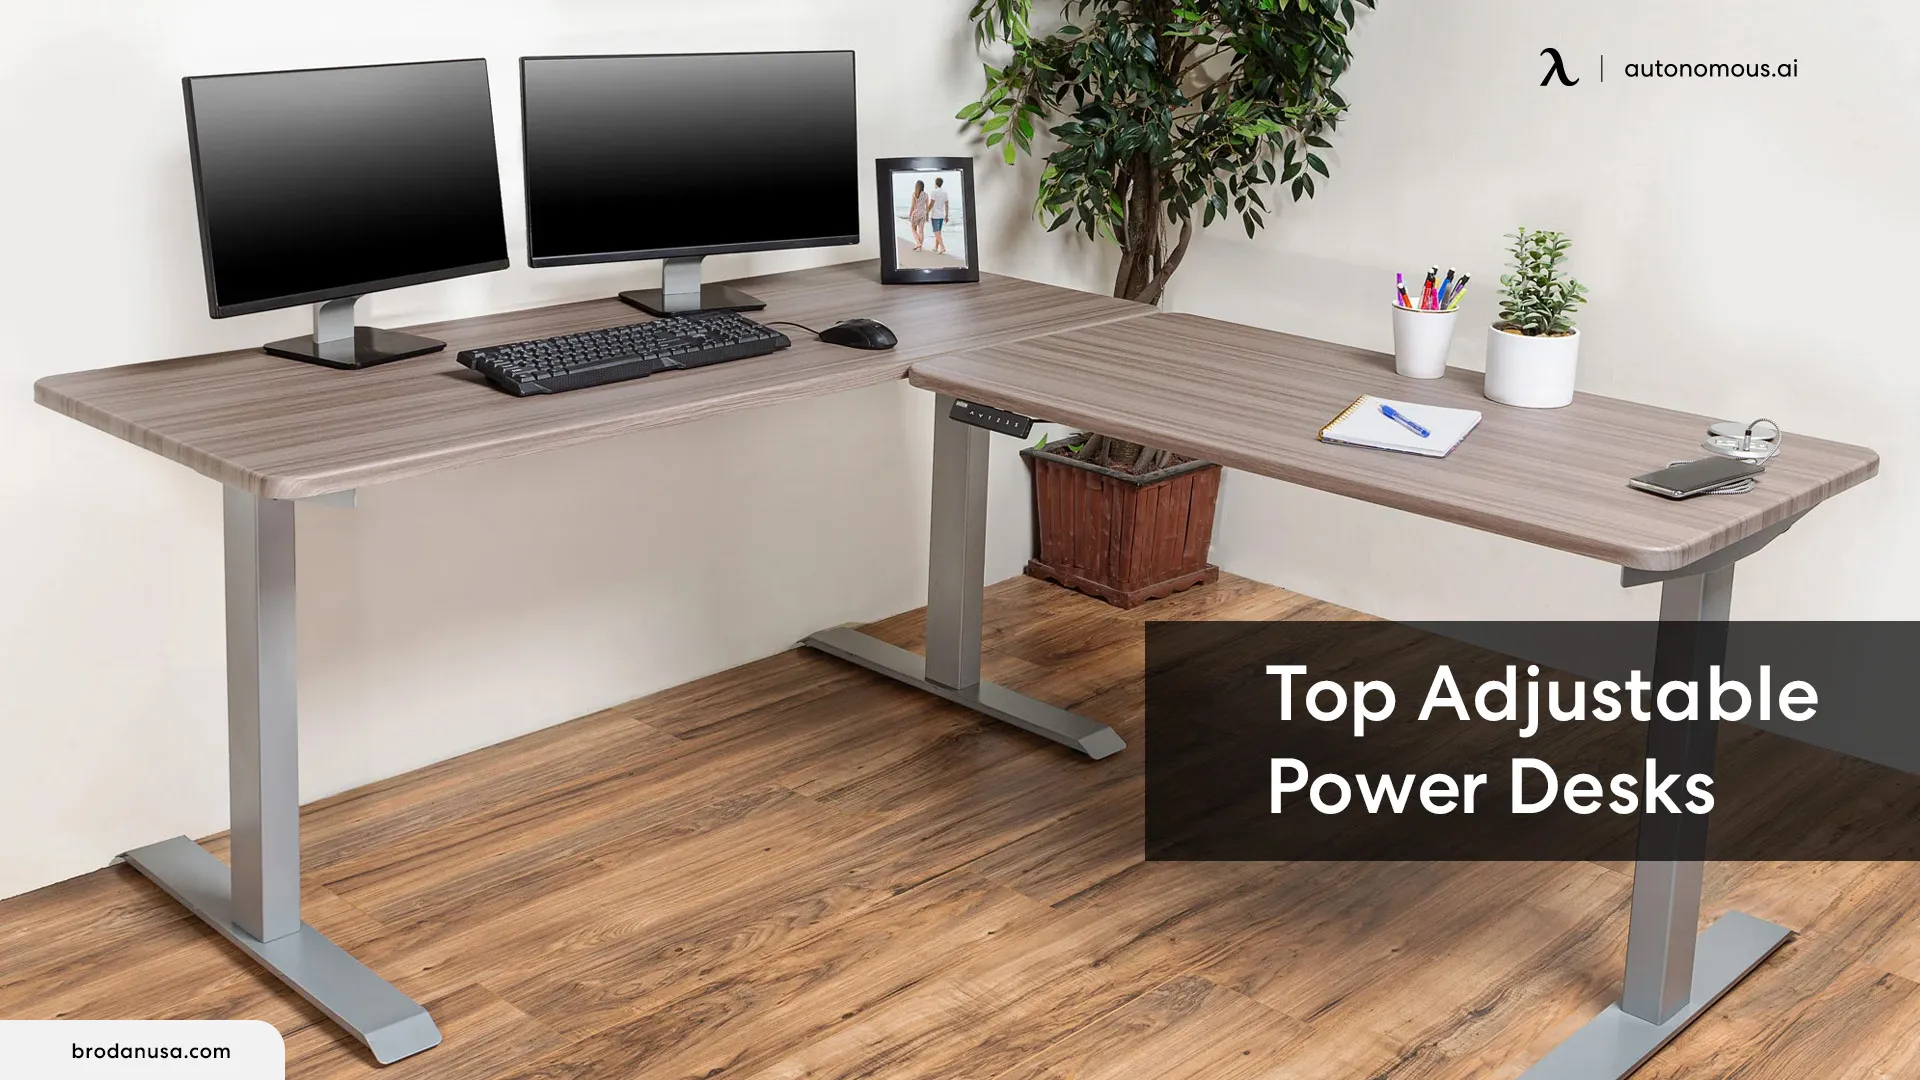 The Best Adjustable Power Desks for Powerful Lifting